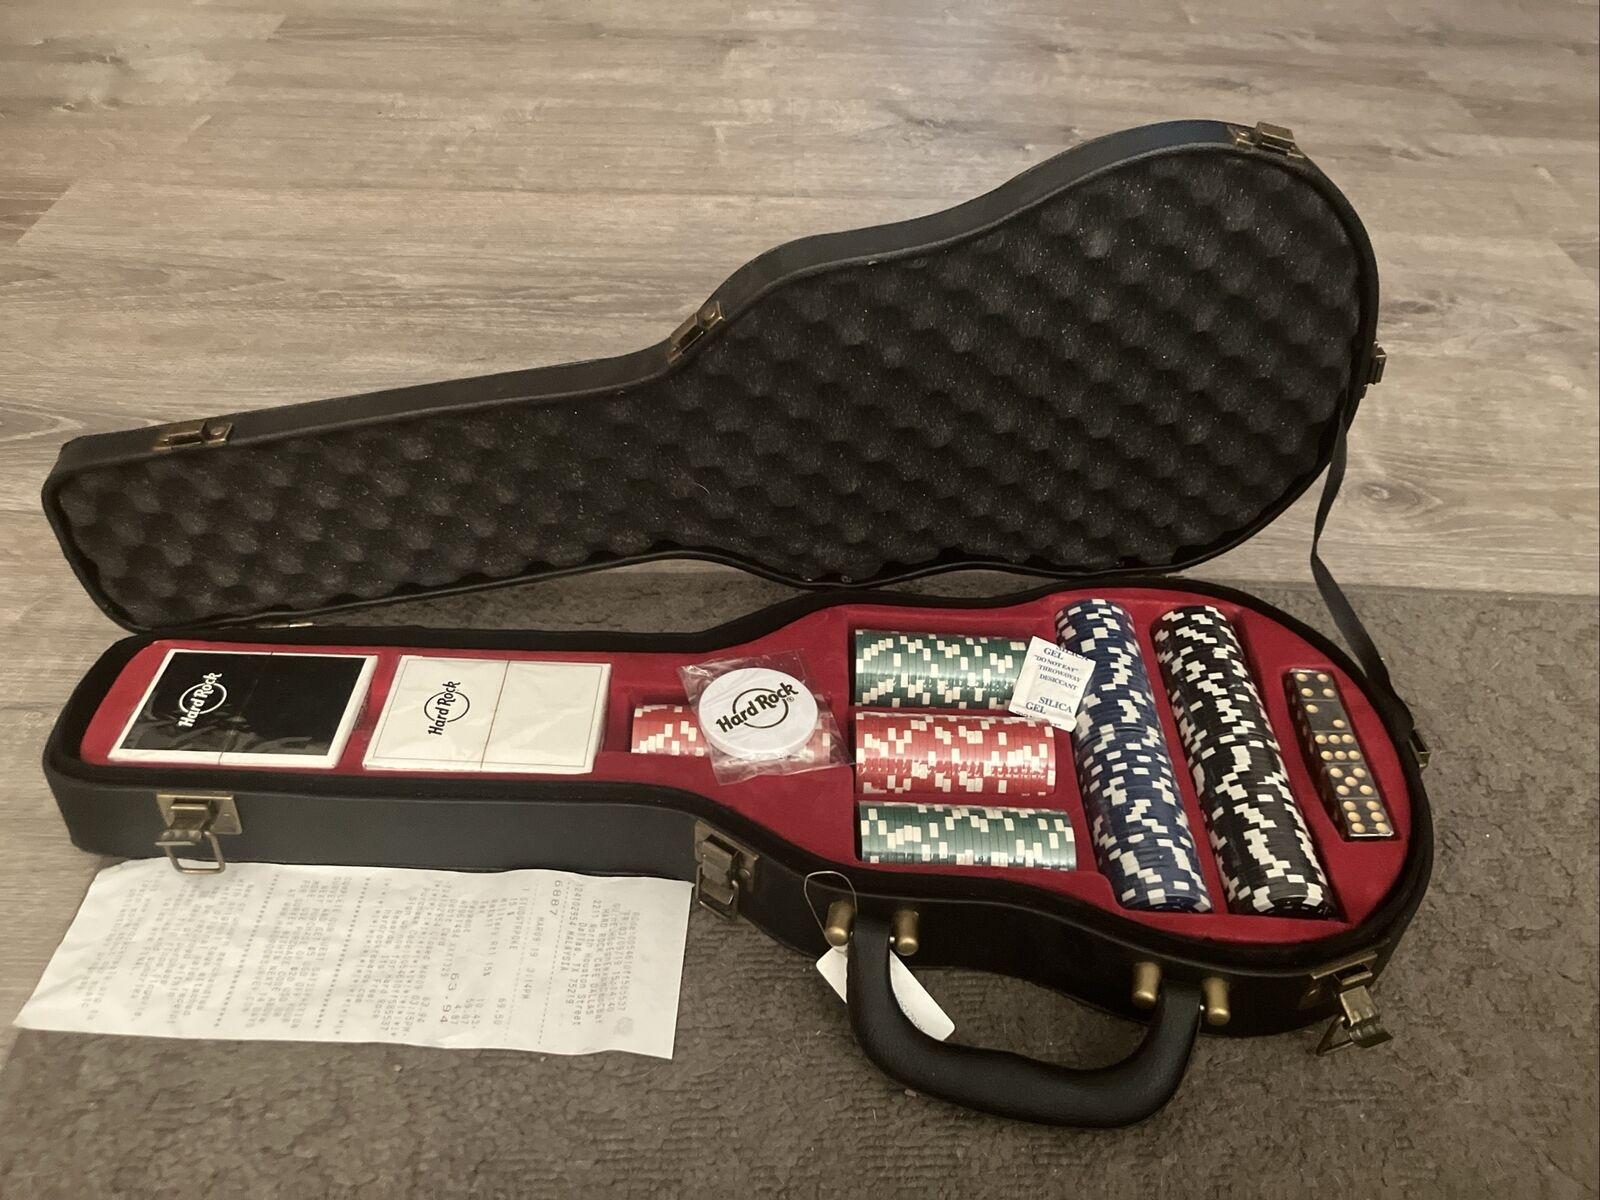 HARD ROCK CAFE POKER SET IN GUITAR CASE LIMITED EDITION GAMBLING PARTY FUN 